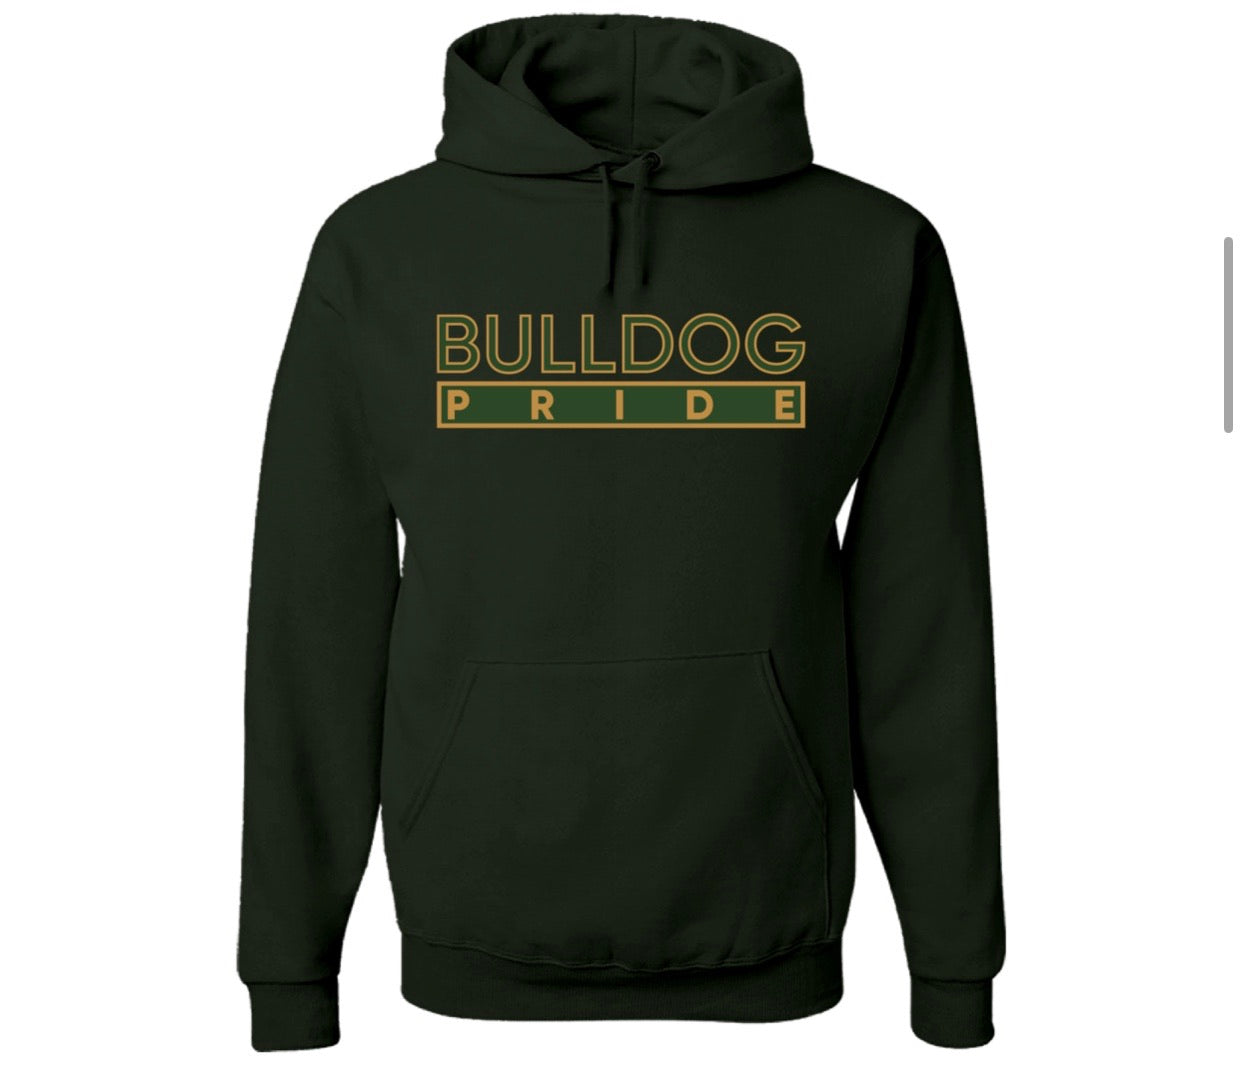 The “Bulldog Pride” Hoodie in Green/Gold (OH)